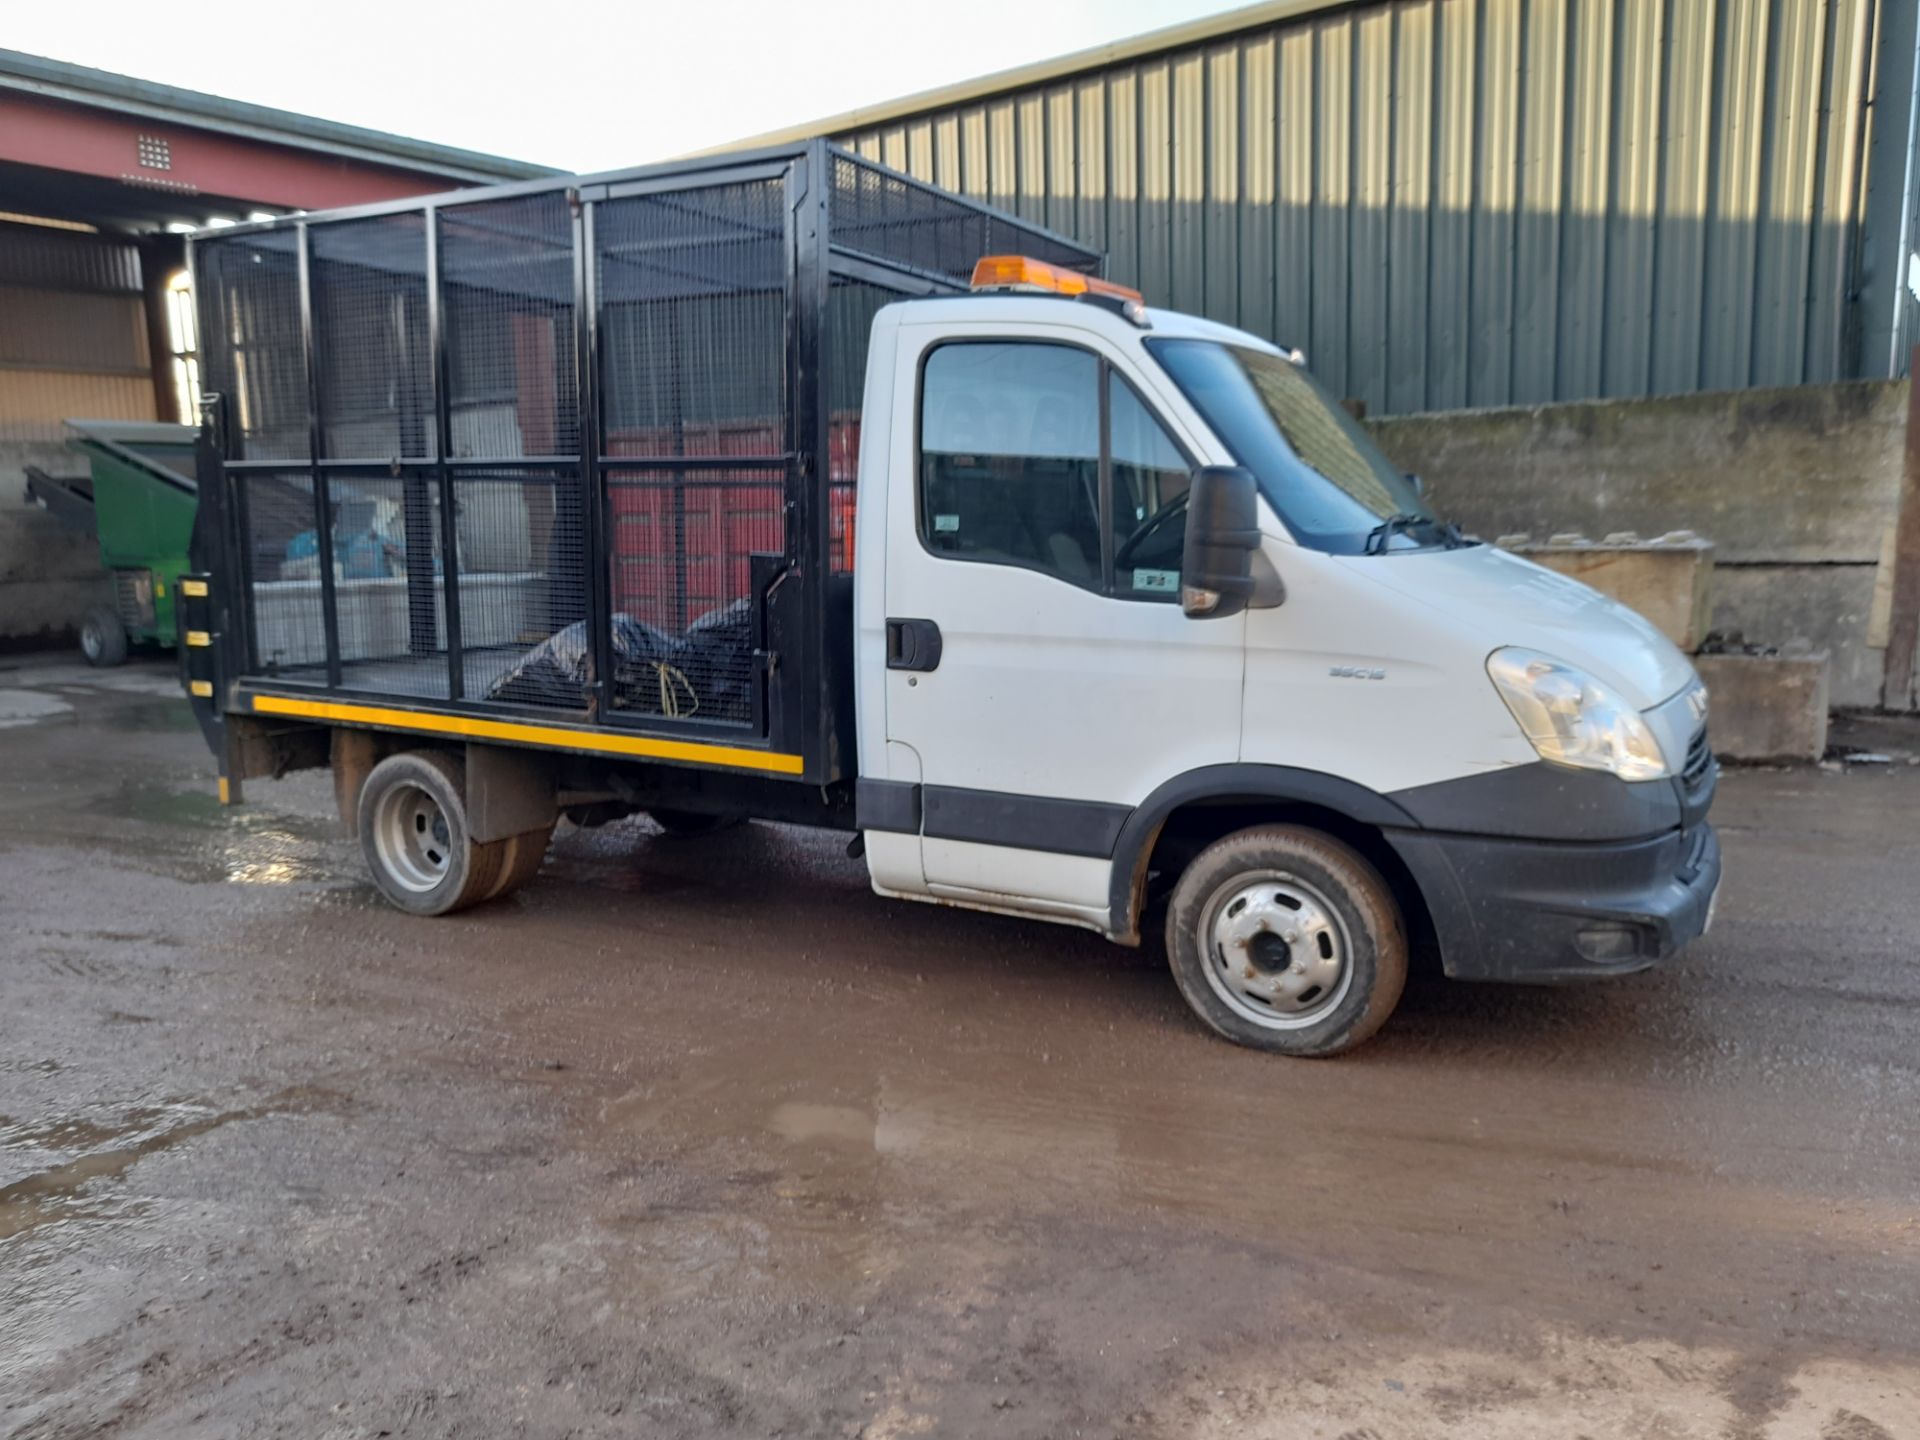 Iveco Daily 35C15 MWB Cage Tipper Van with Tail Lift and Spenborough Engineering cage, s/n 2373, - Image 10 of 13